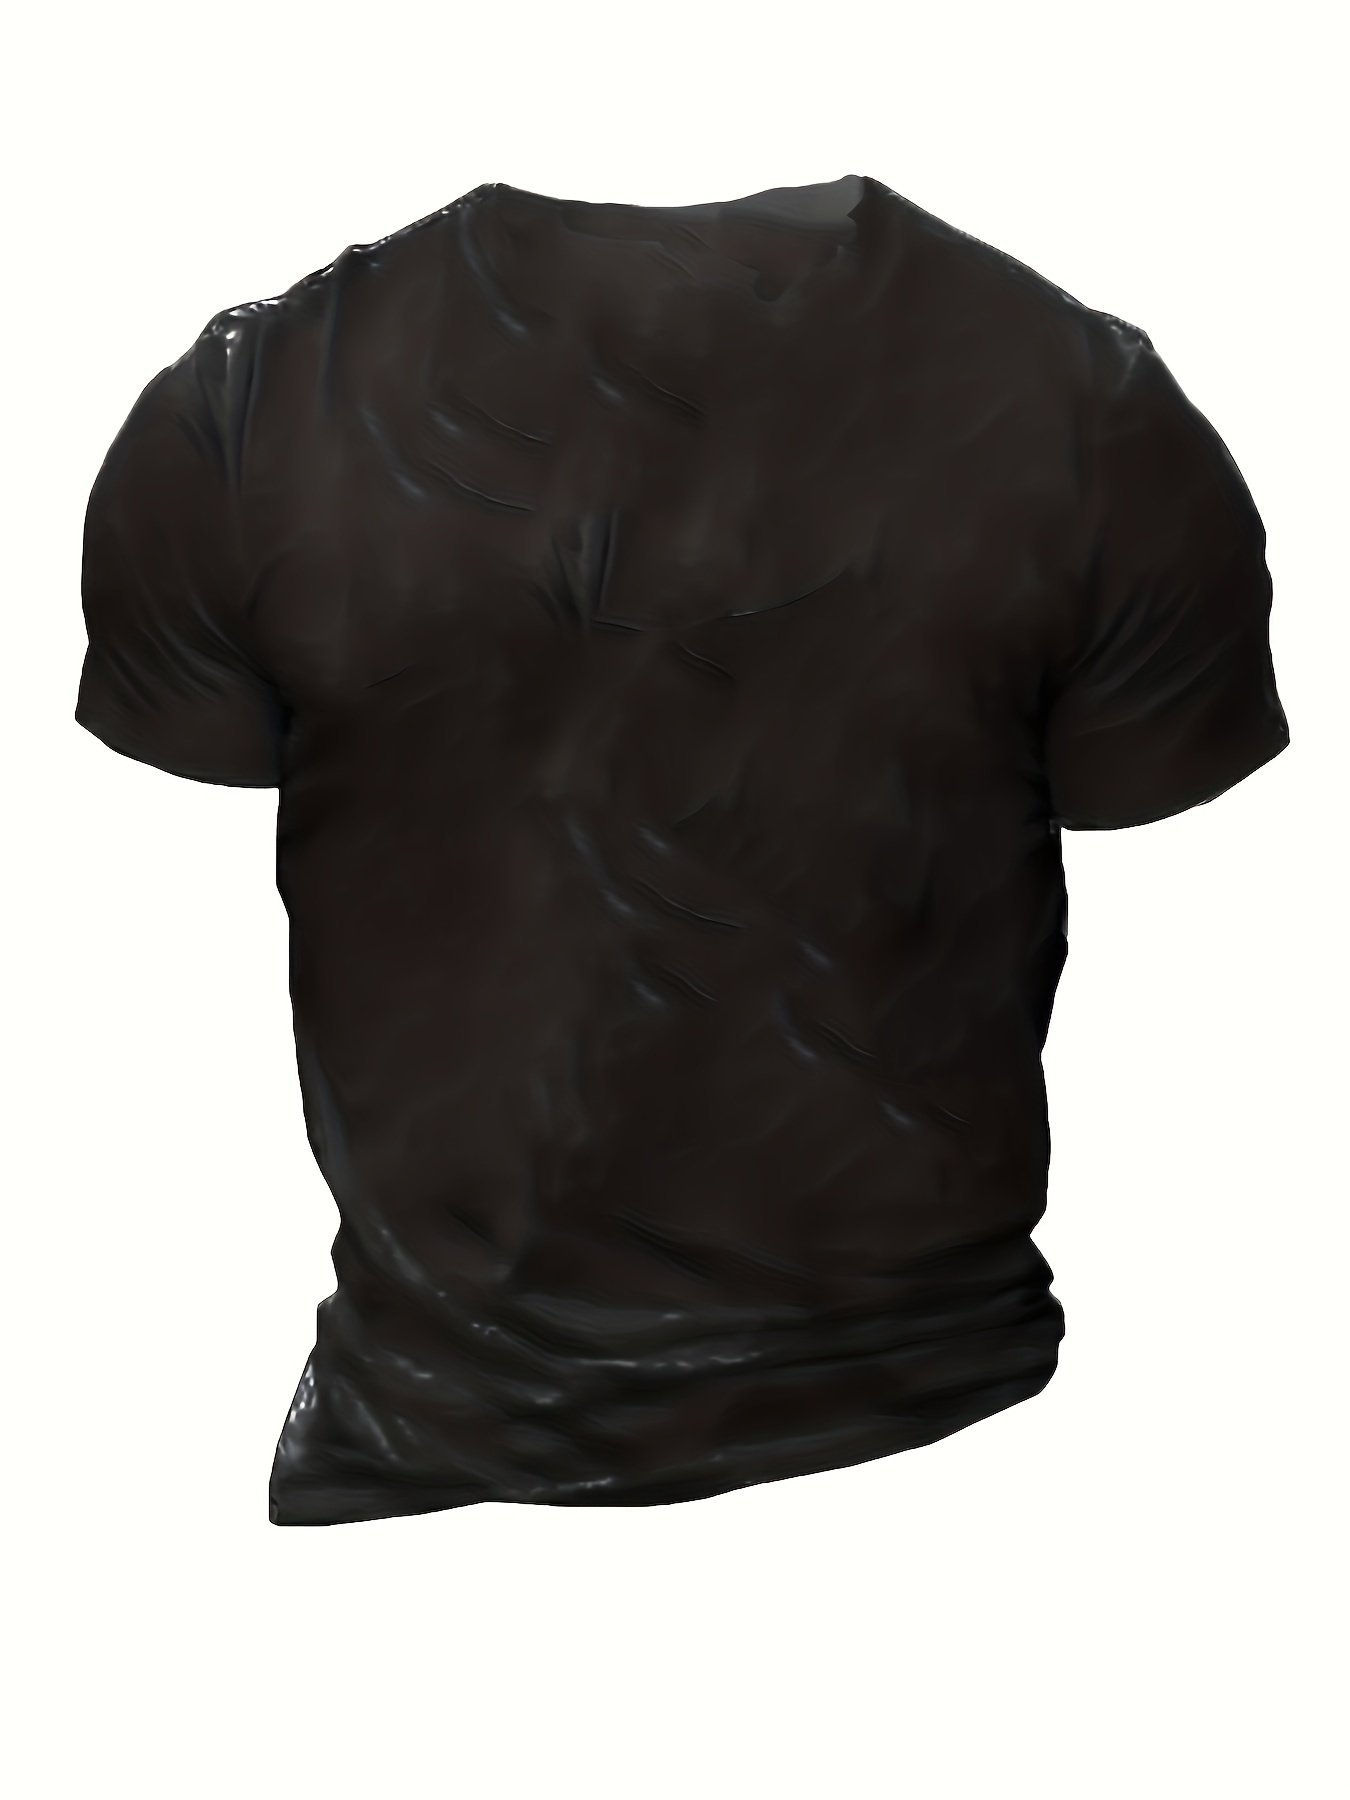 give you roblox clothing templates 100 plus high quality